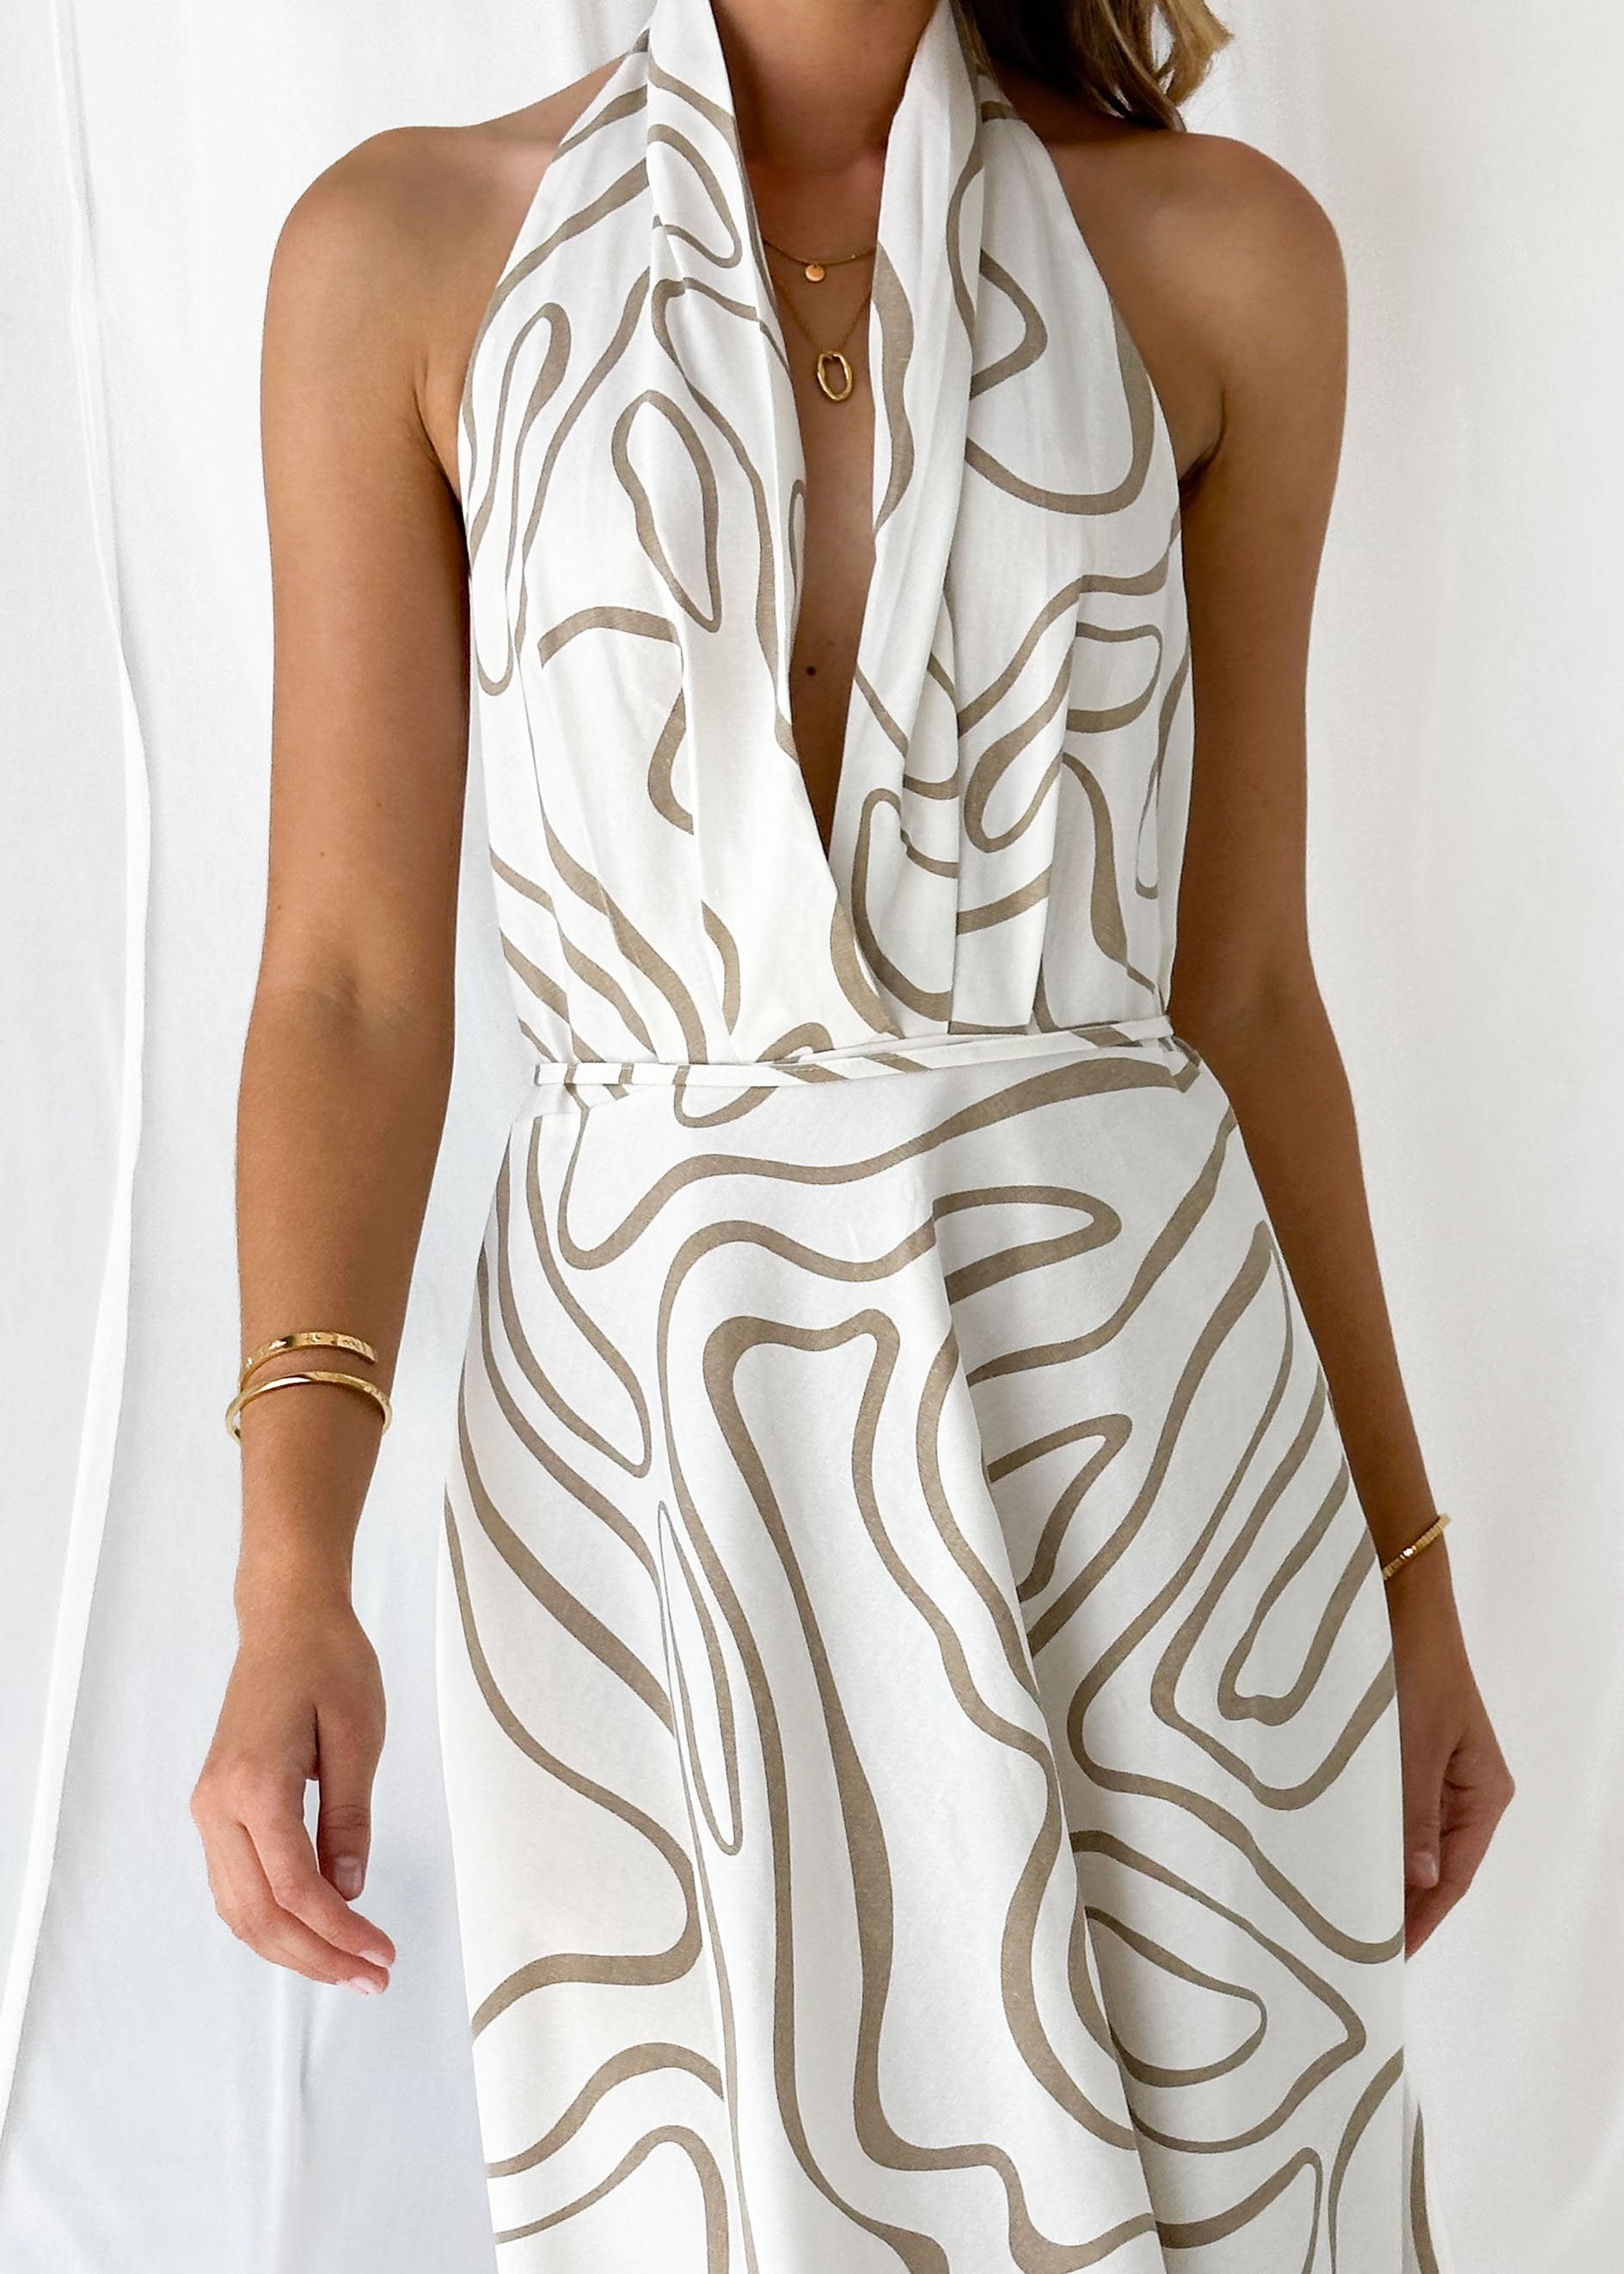 White halter top flowy maxi dress with gold necklace